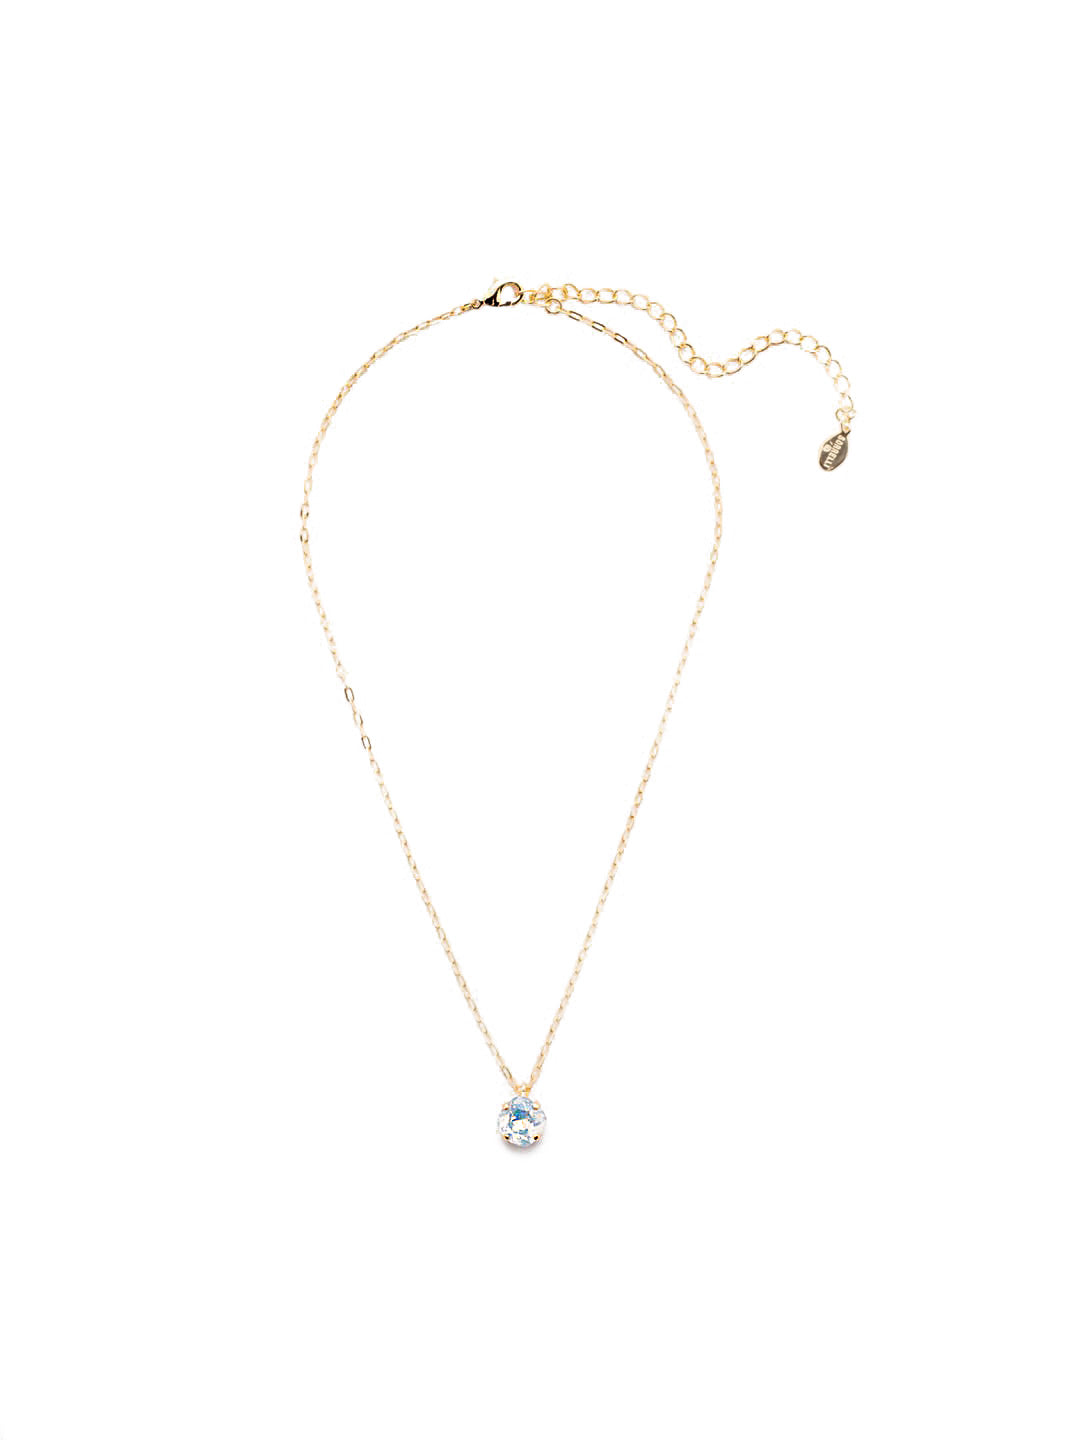 Siren Pendant Necklace - NEP22BGWO - <p>With a cushion-cut crystal and delicate chain, the Siren Pendant  will add a litle sparkle to your everyday look. From Sorrelli's White Opal collection in our Bright Gold-tone finish.</p>